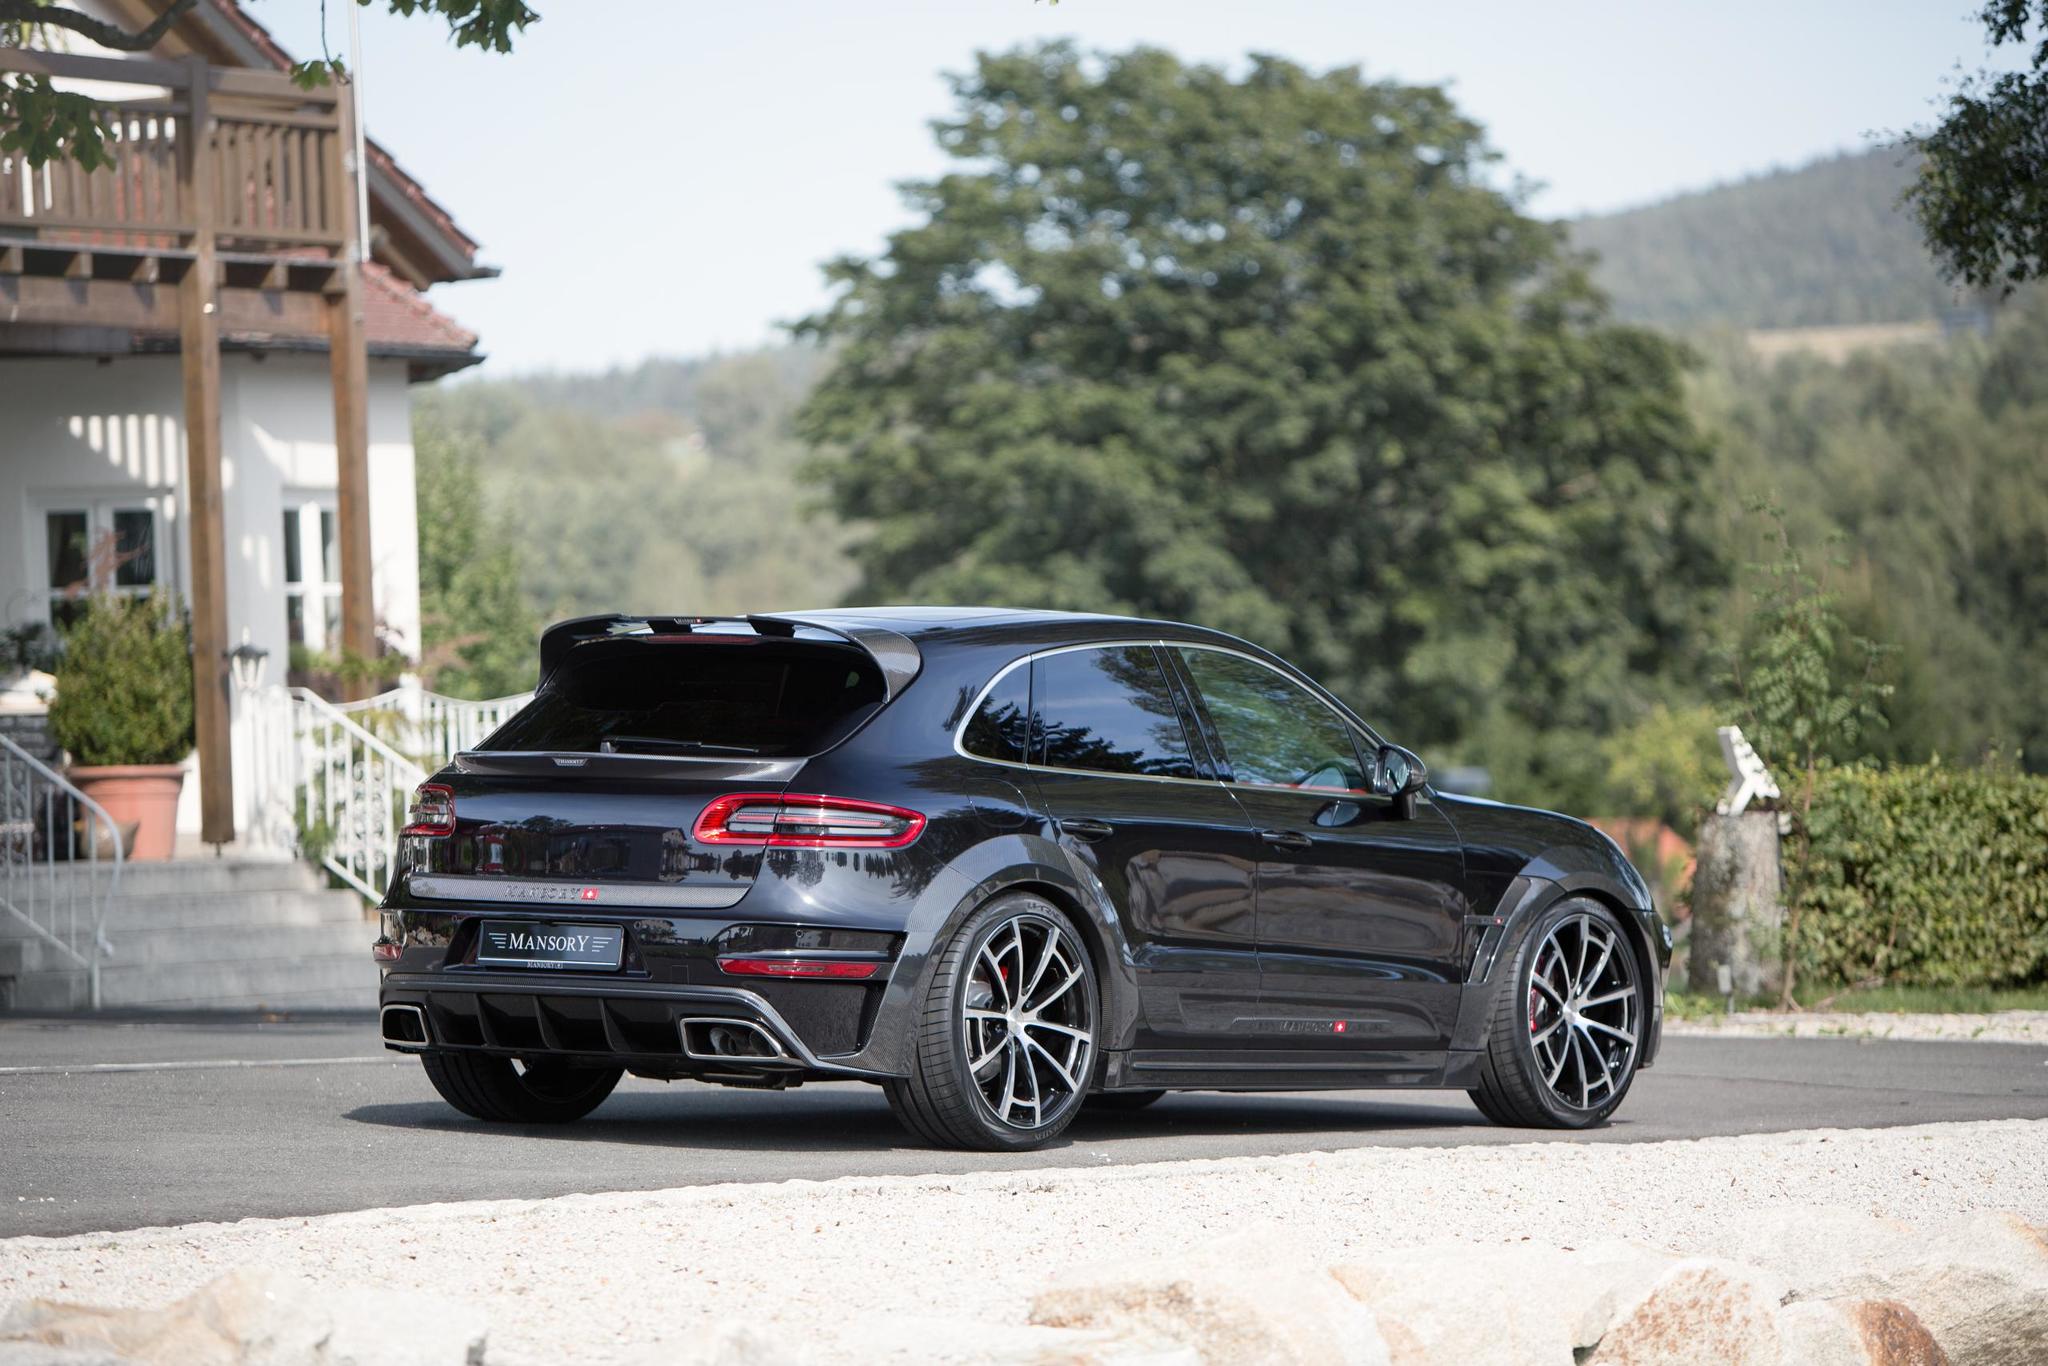 Mansory body kit for Porsche Macan new style